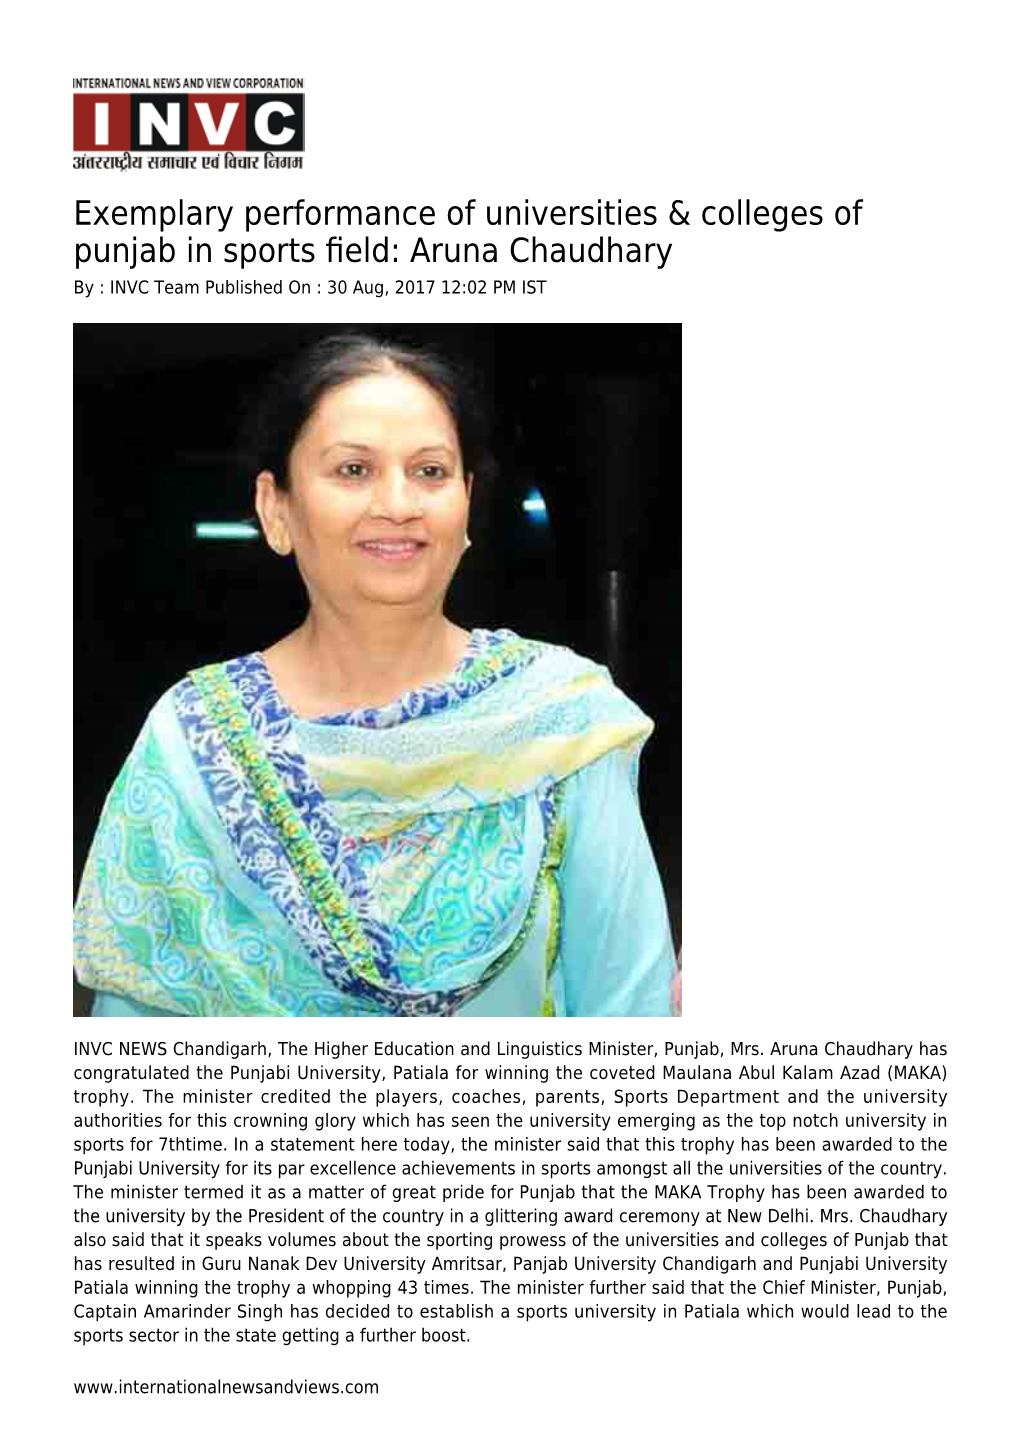 Aruna Chaudhary by : INVC Team Published on : 30 Aug, 2017 12:02 PM IST